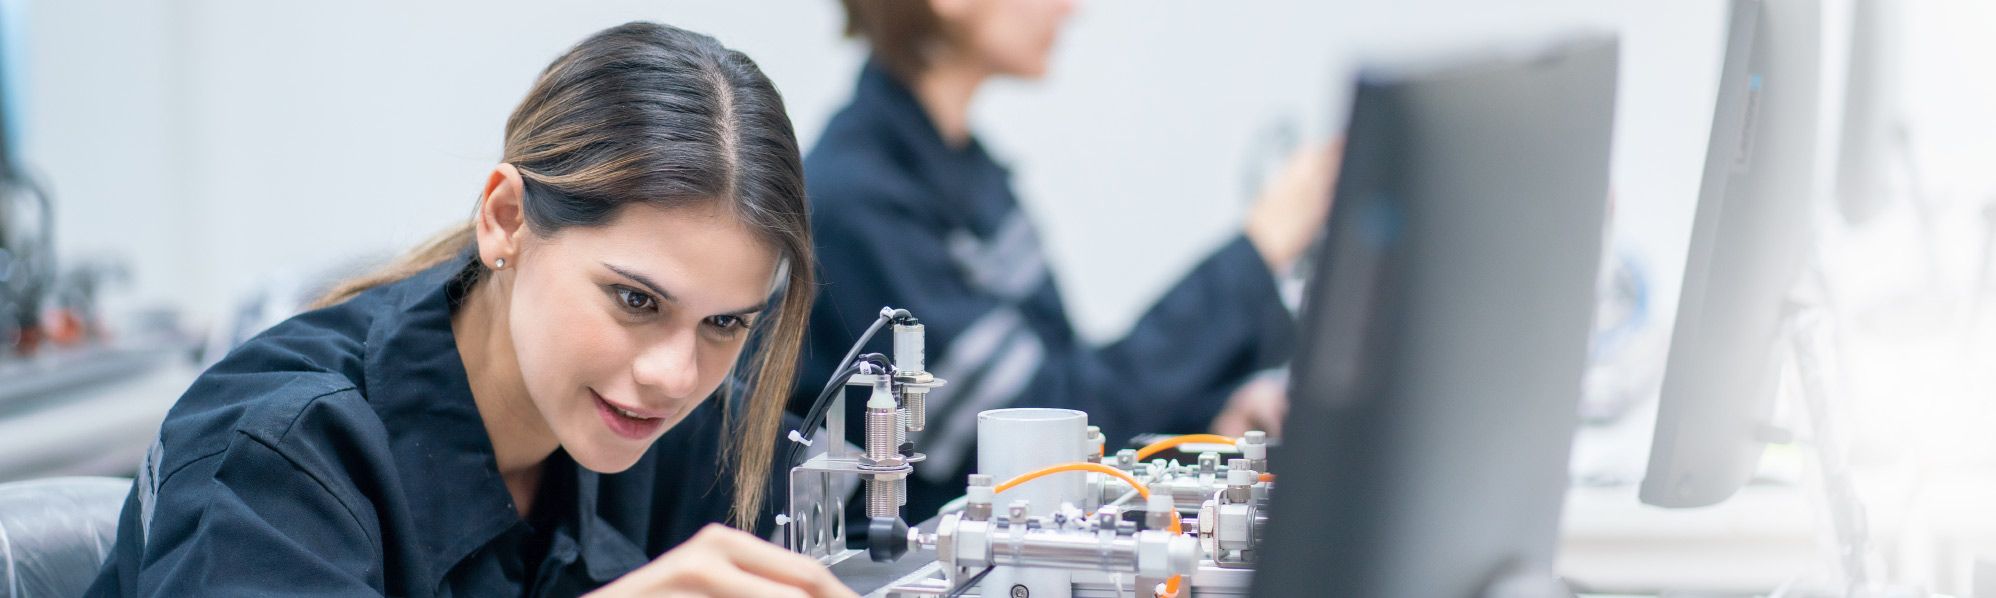 The Role Employers Have To Play In Shaping The Next Generation Of Engineers